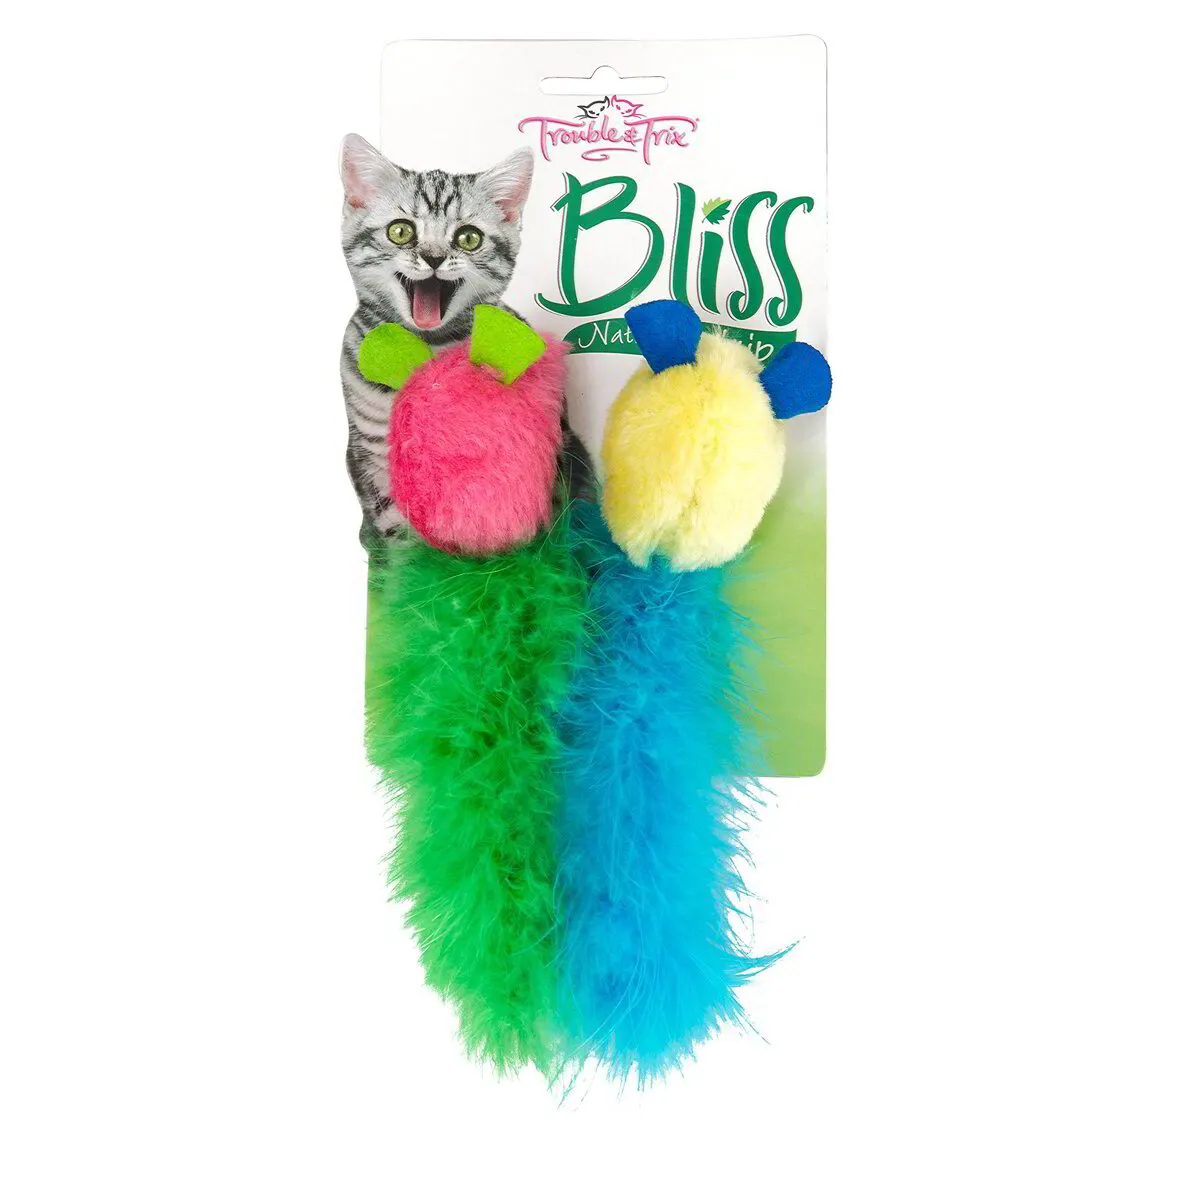 Trouble and Trix Bliss Catnip Tweet Mice Cat Toys - 2 Pack